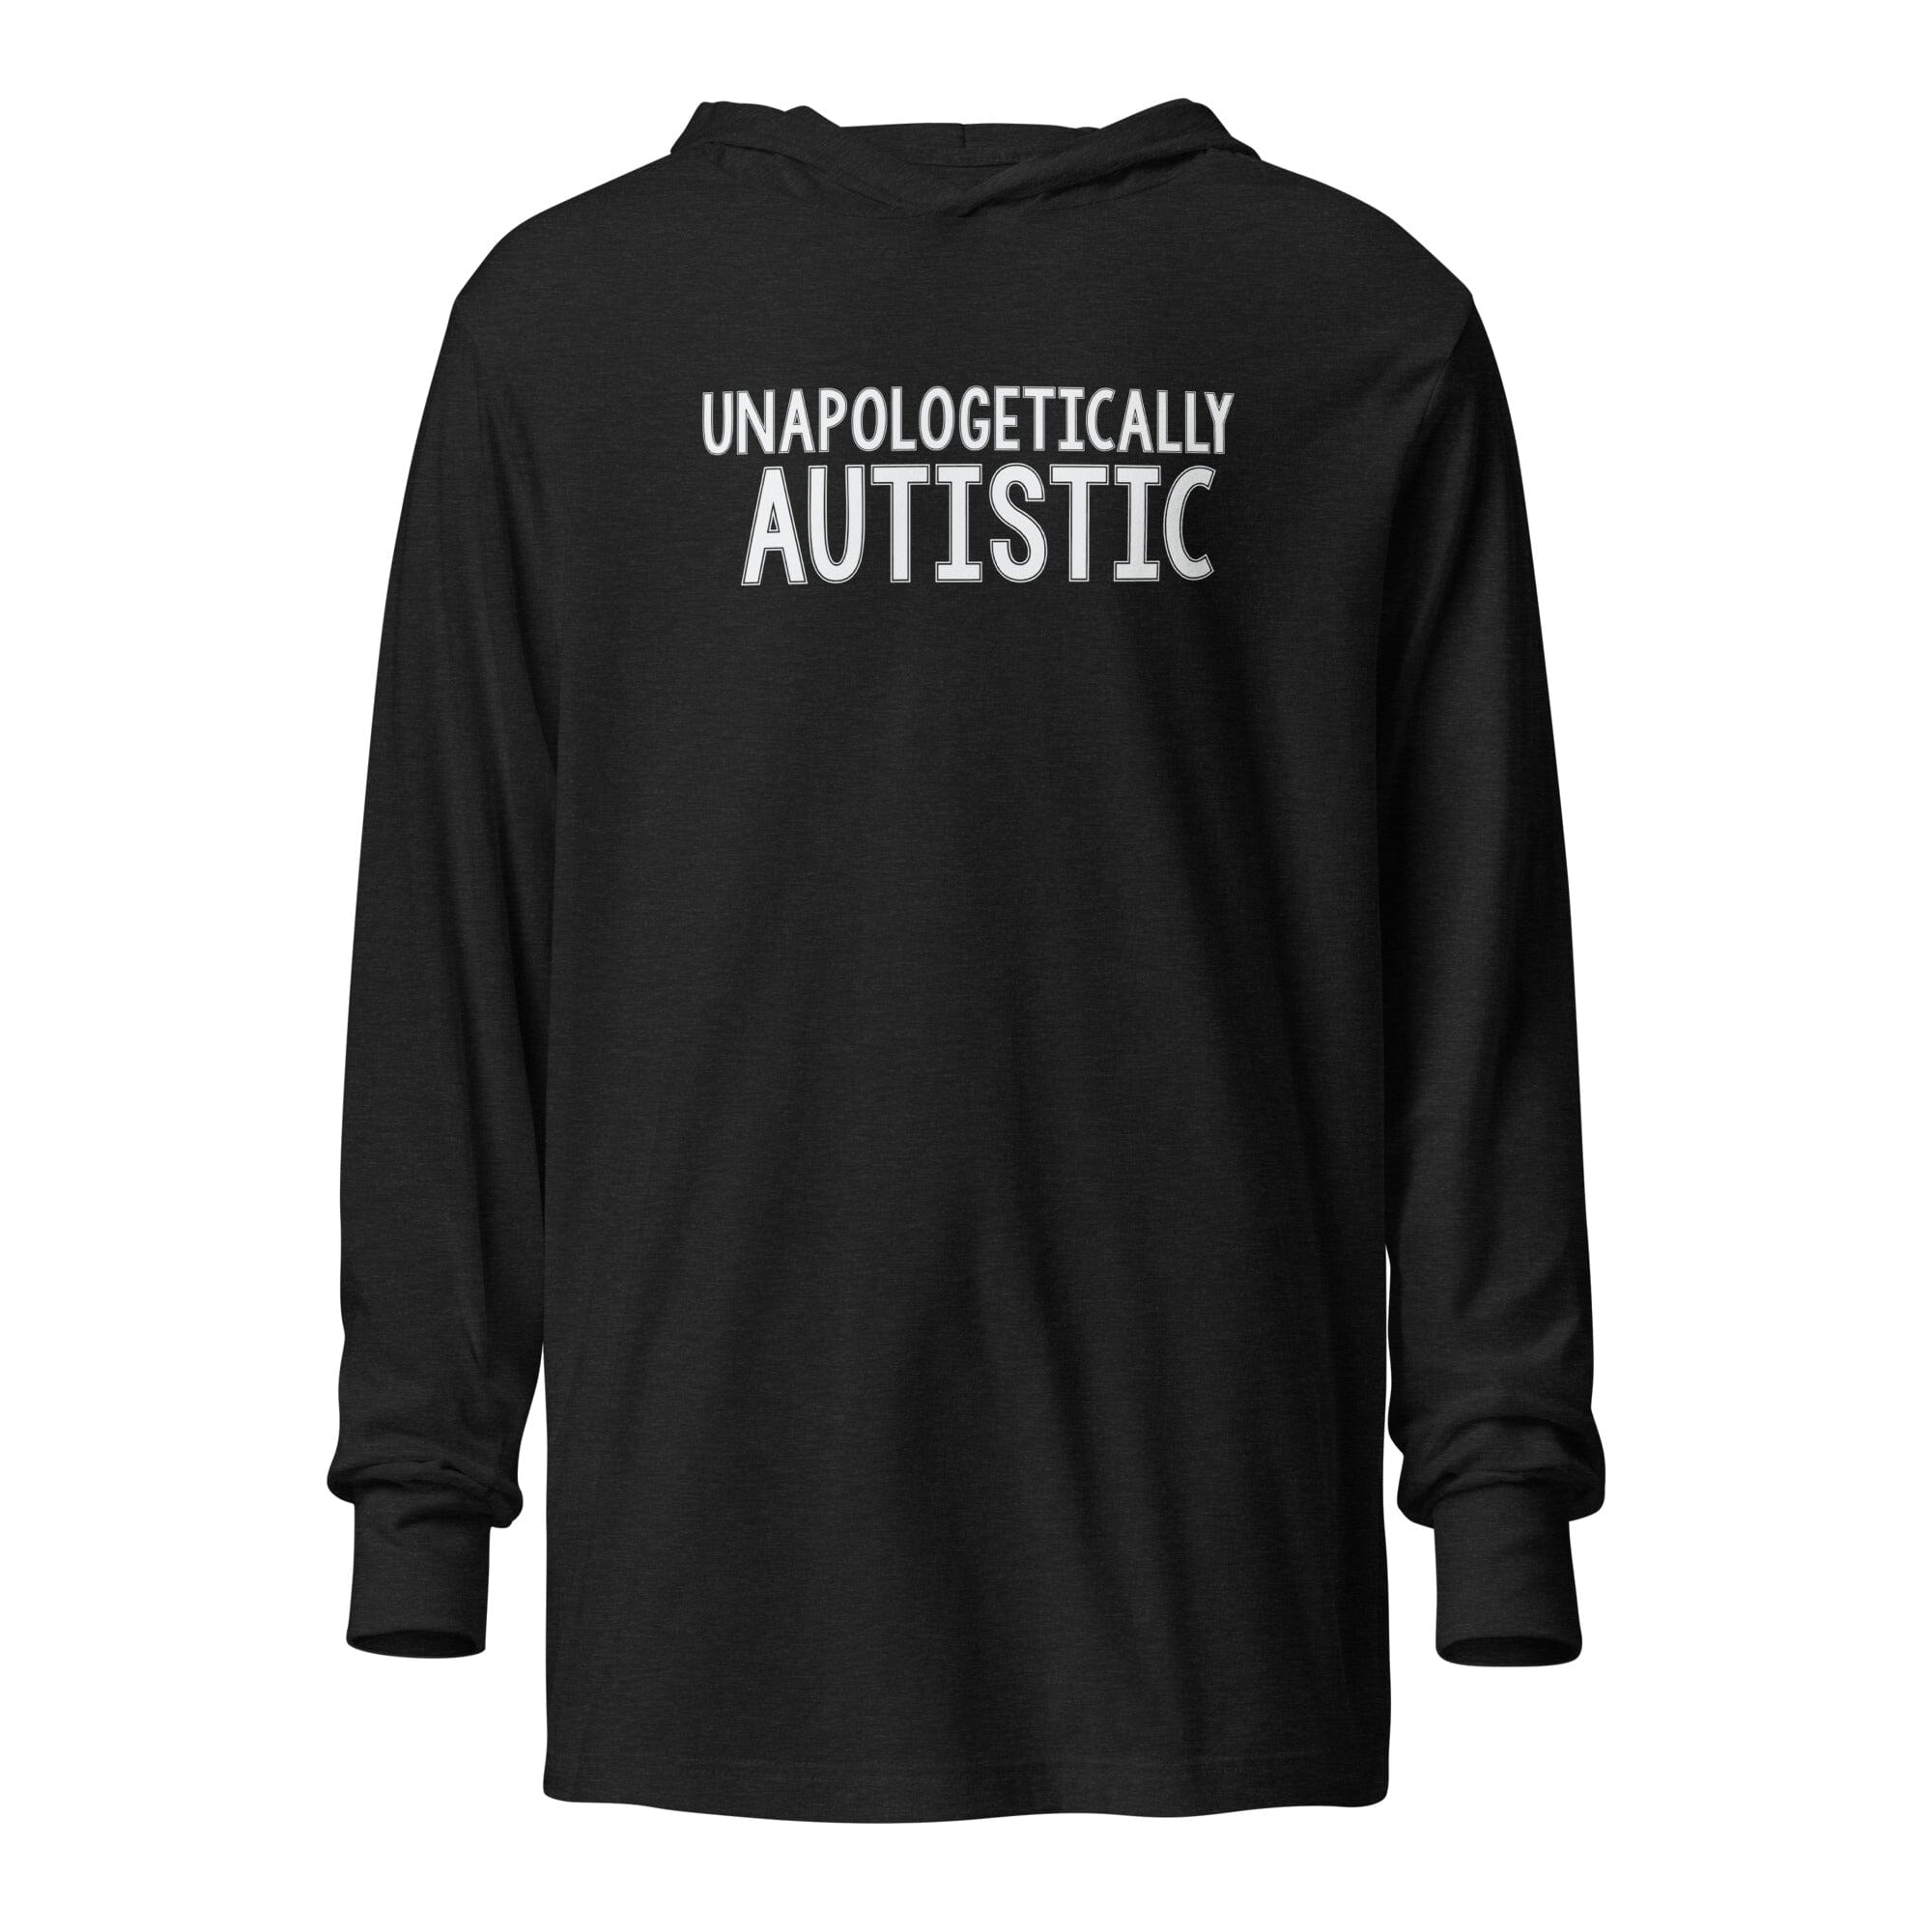 Unapologetically Autistic Unisex Hooded long-sleeve tee The Autistic Innovator Charcoal-Black Triblend XS 